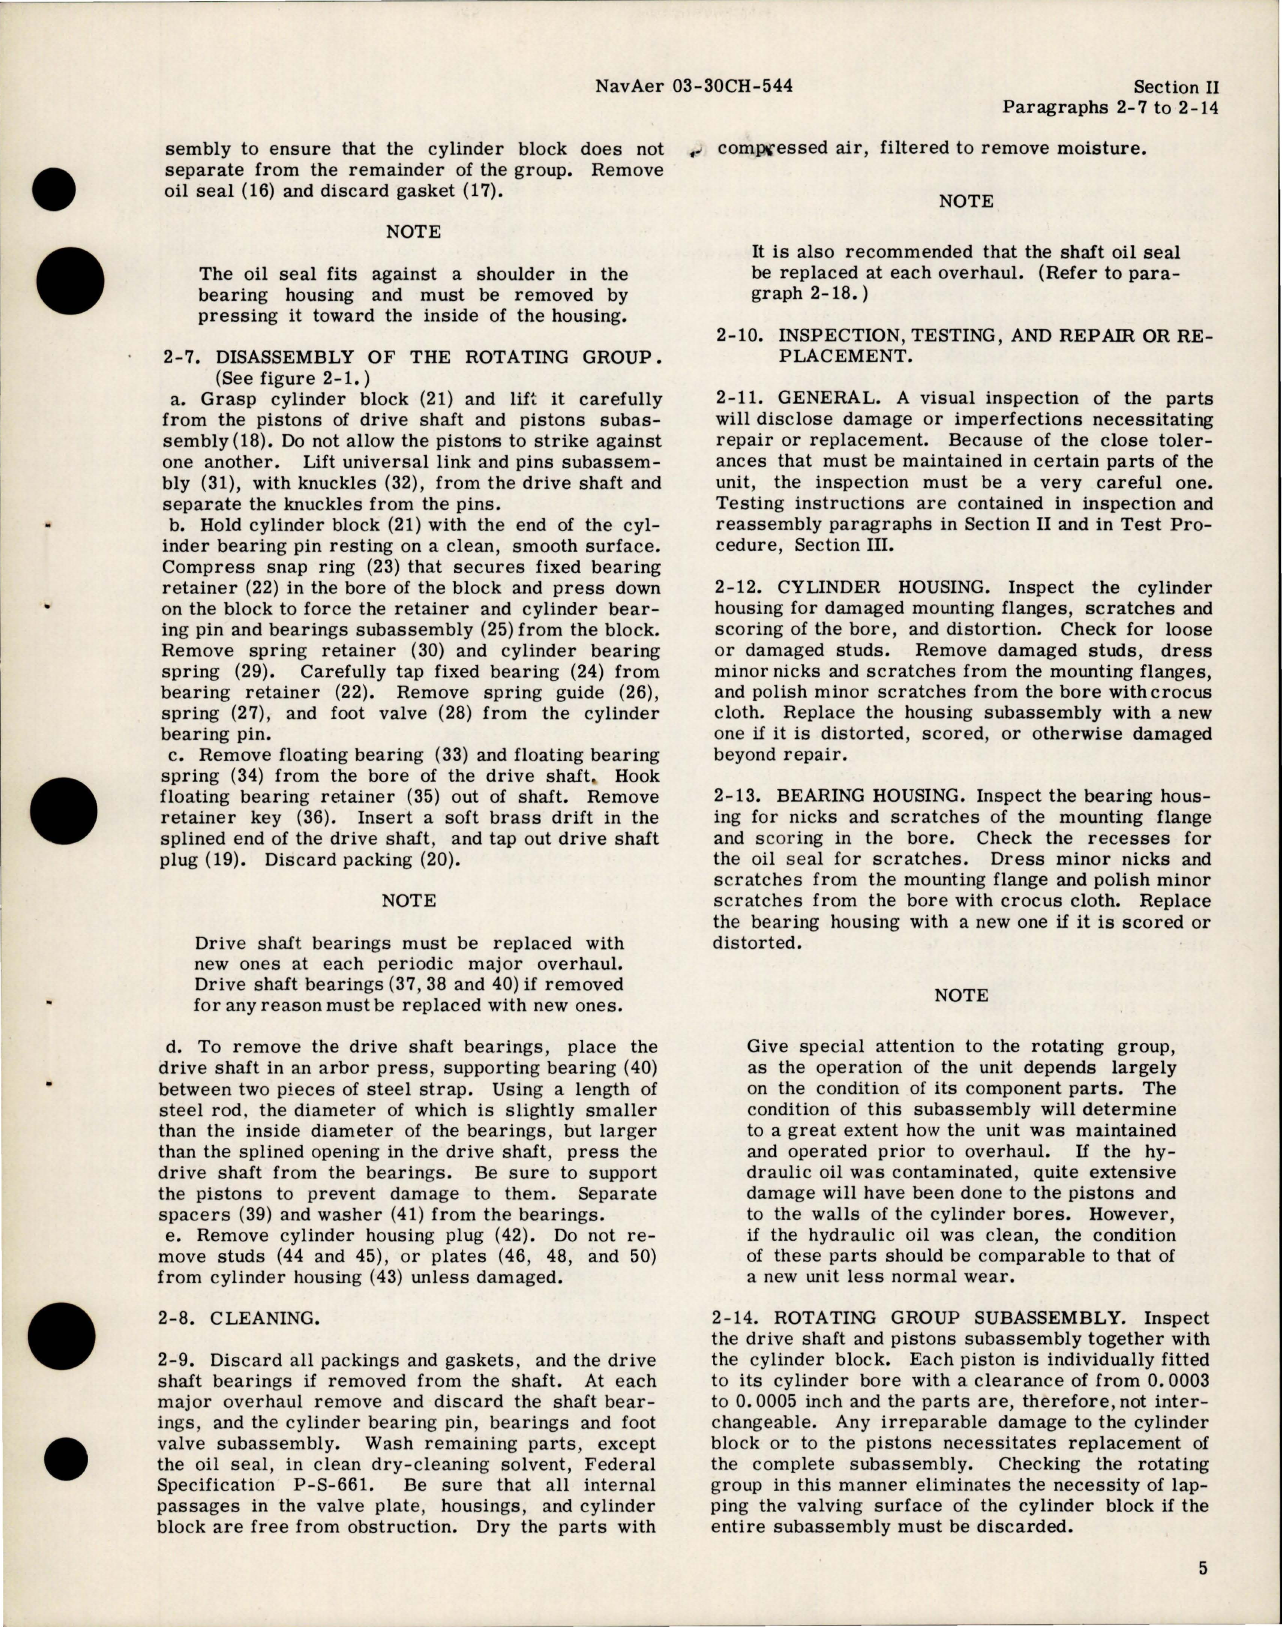 Sample page 9 from AirCorps Library document: Overhaul Instructions for Constant Displacement Hydraulic Pump Assemblies - PF-2713 Series 